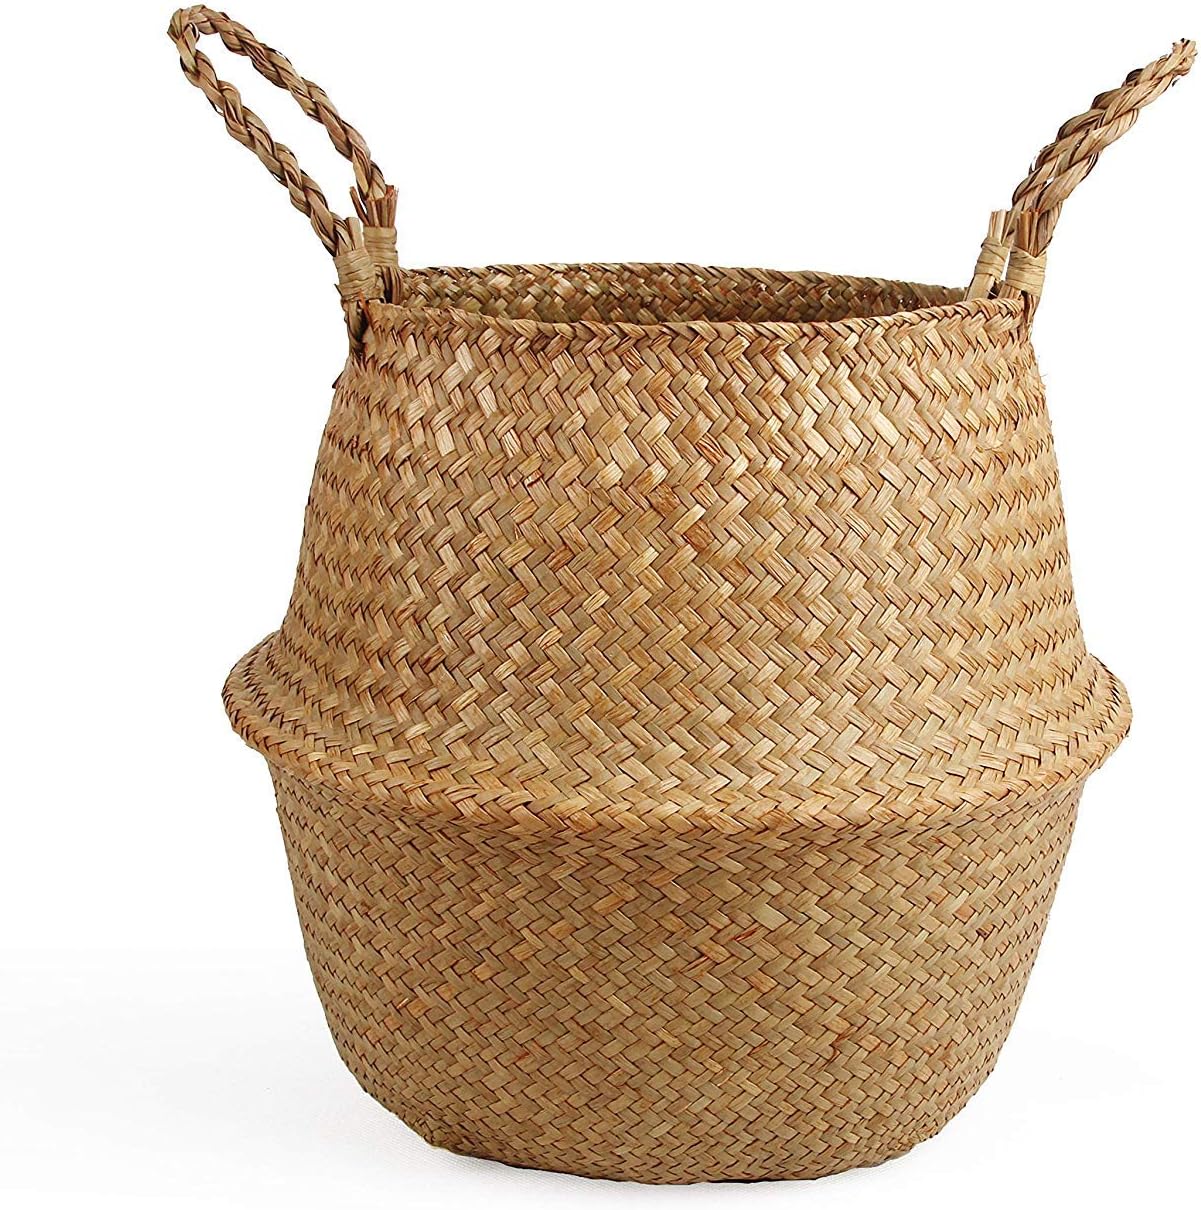 After months of fruitless searching for the perfect basket for our potted silk Fiddle Leaf Fig plant I ran across this listing on Amazon, and Im so happy I did! The basket is well made, beautiful, and fits the plant perfectly, very happy with this purchase!